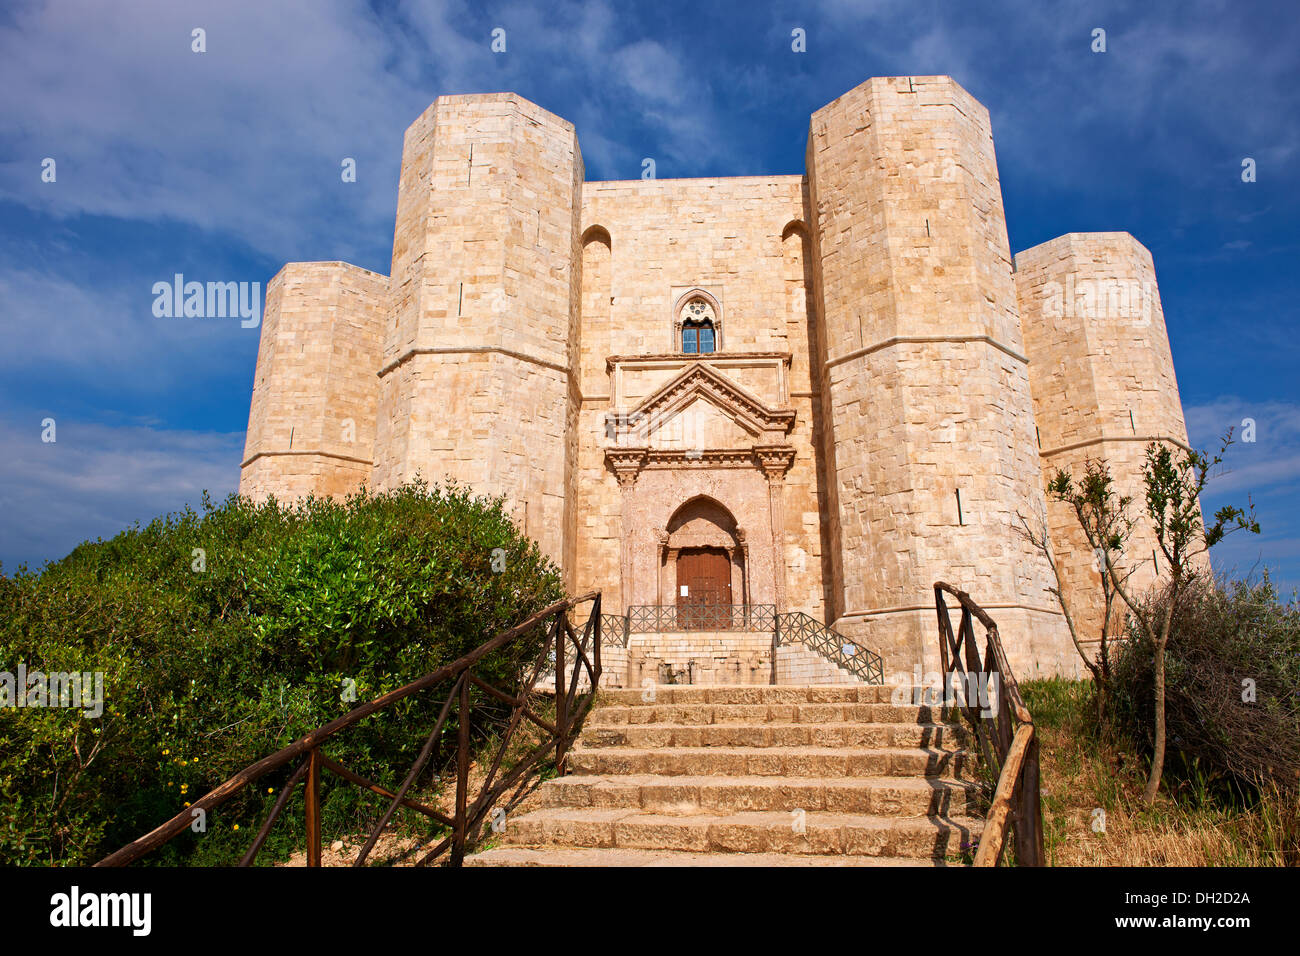 The medieval octagonal castle Castel Del Monte, near Andria in the Apulia southern Italy Stock Photo